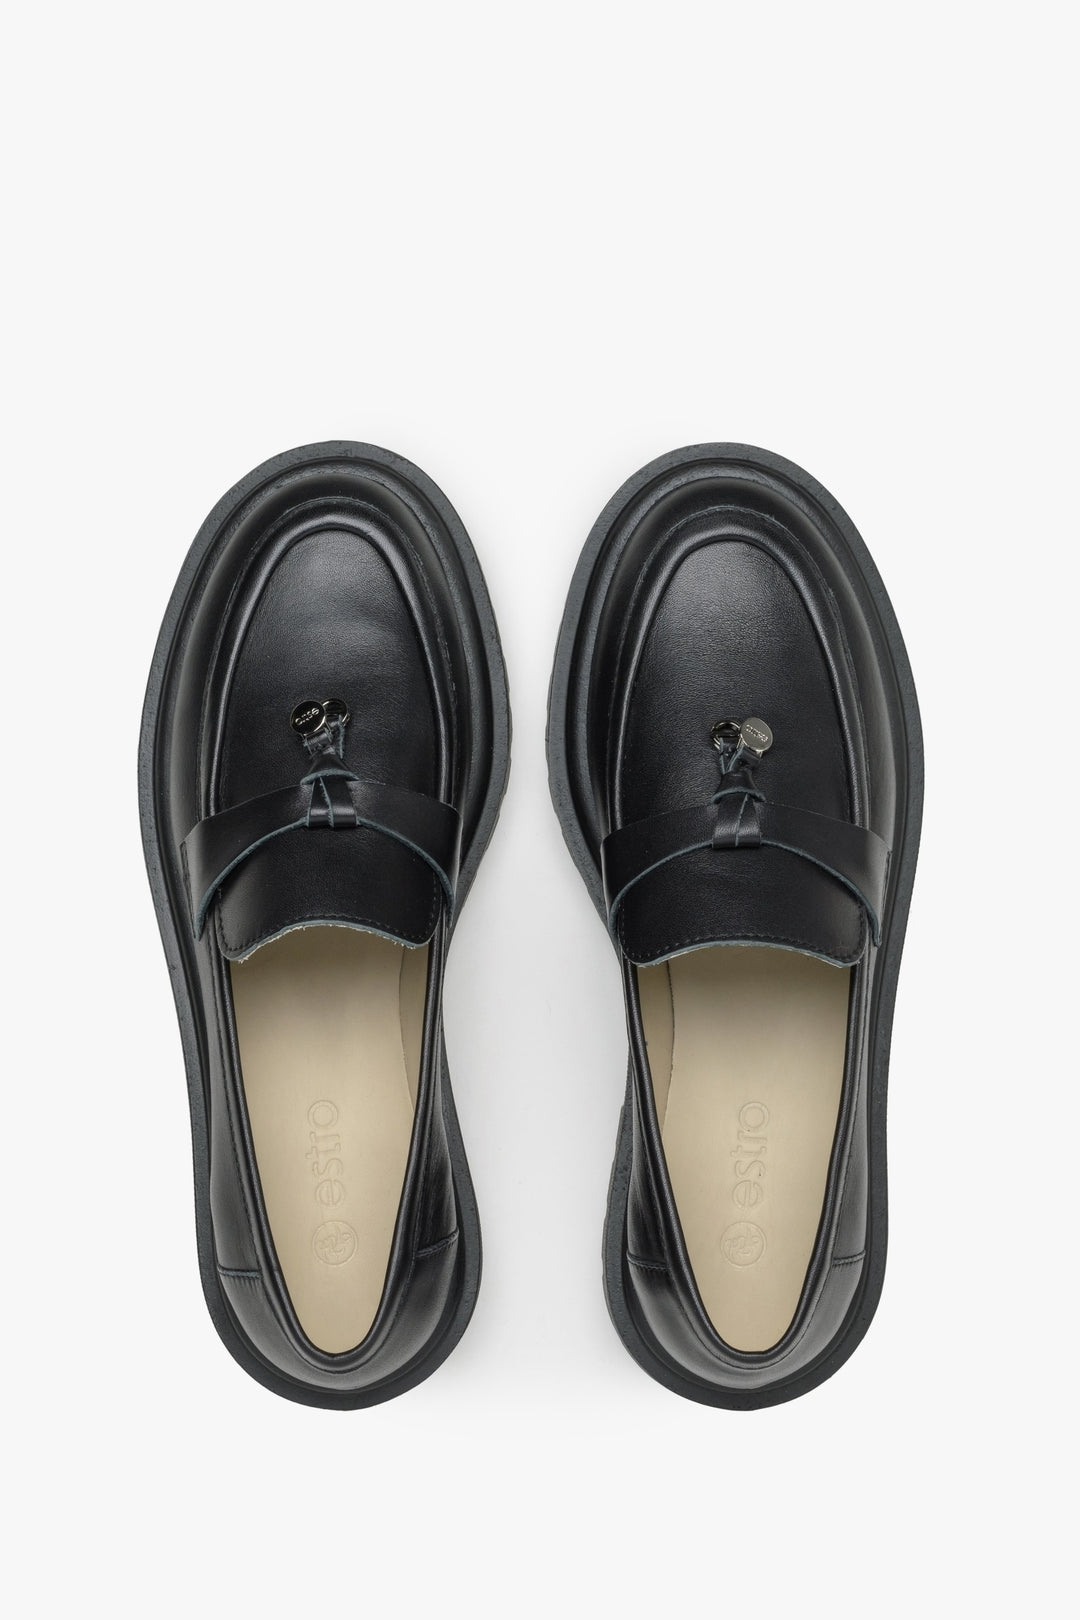 Women's slip-on loafers made of black Italian genuine leather - top view presentation of the model.